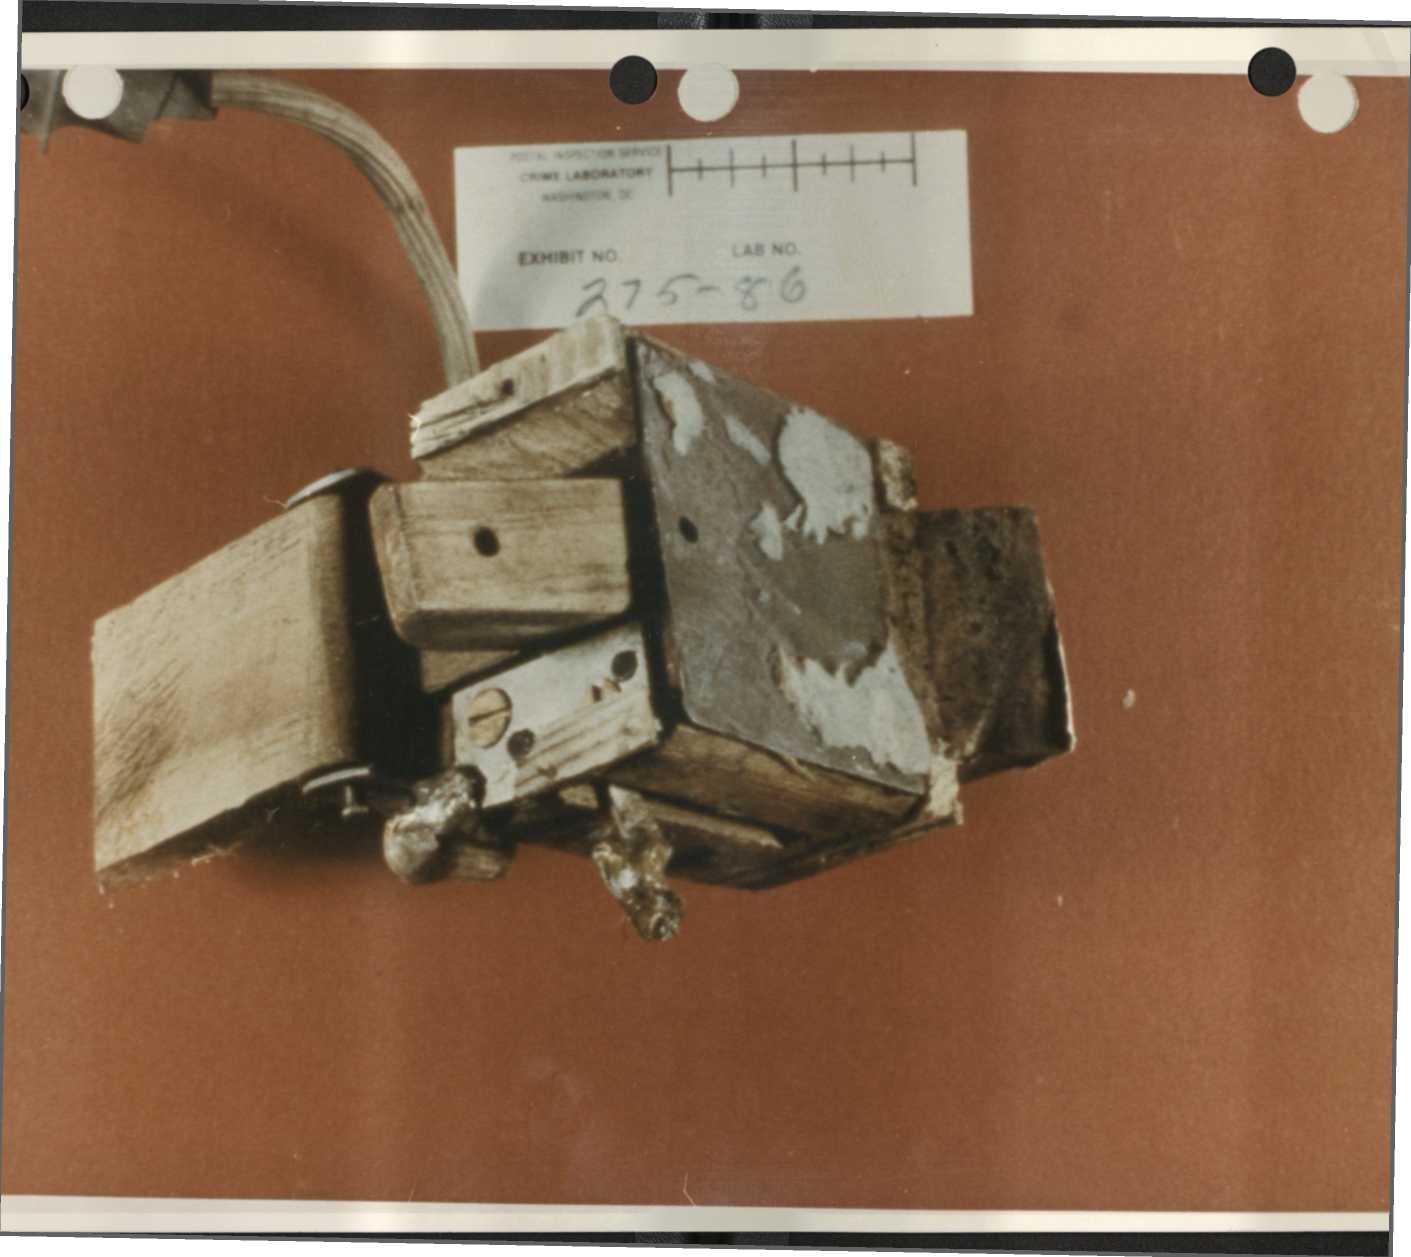 p-o-photos-of-explosive-devices-sent-in-mail-and-t-5.jpg